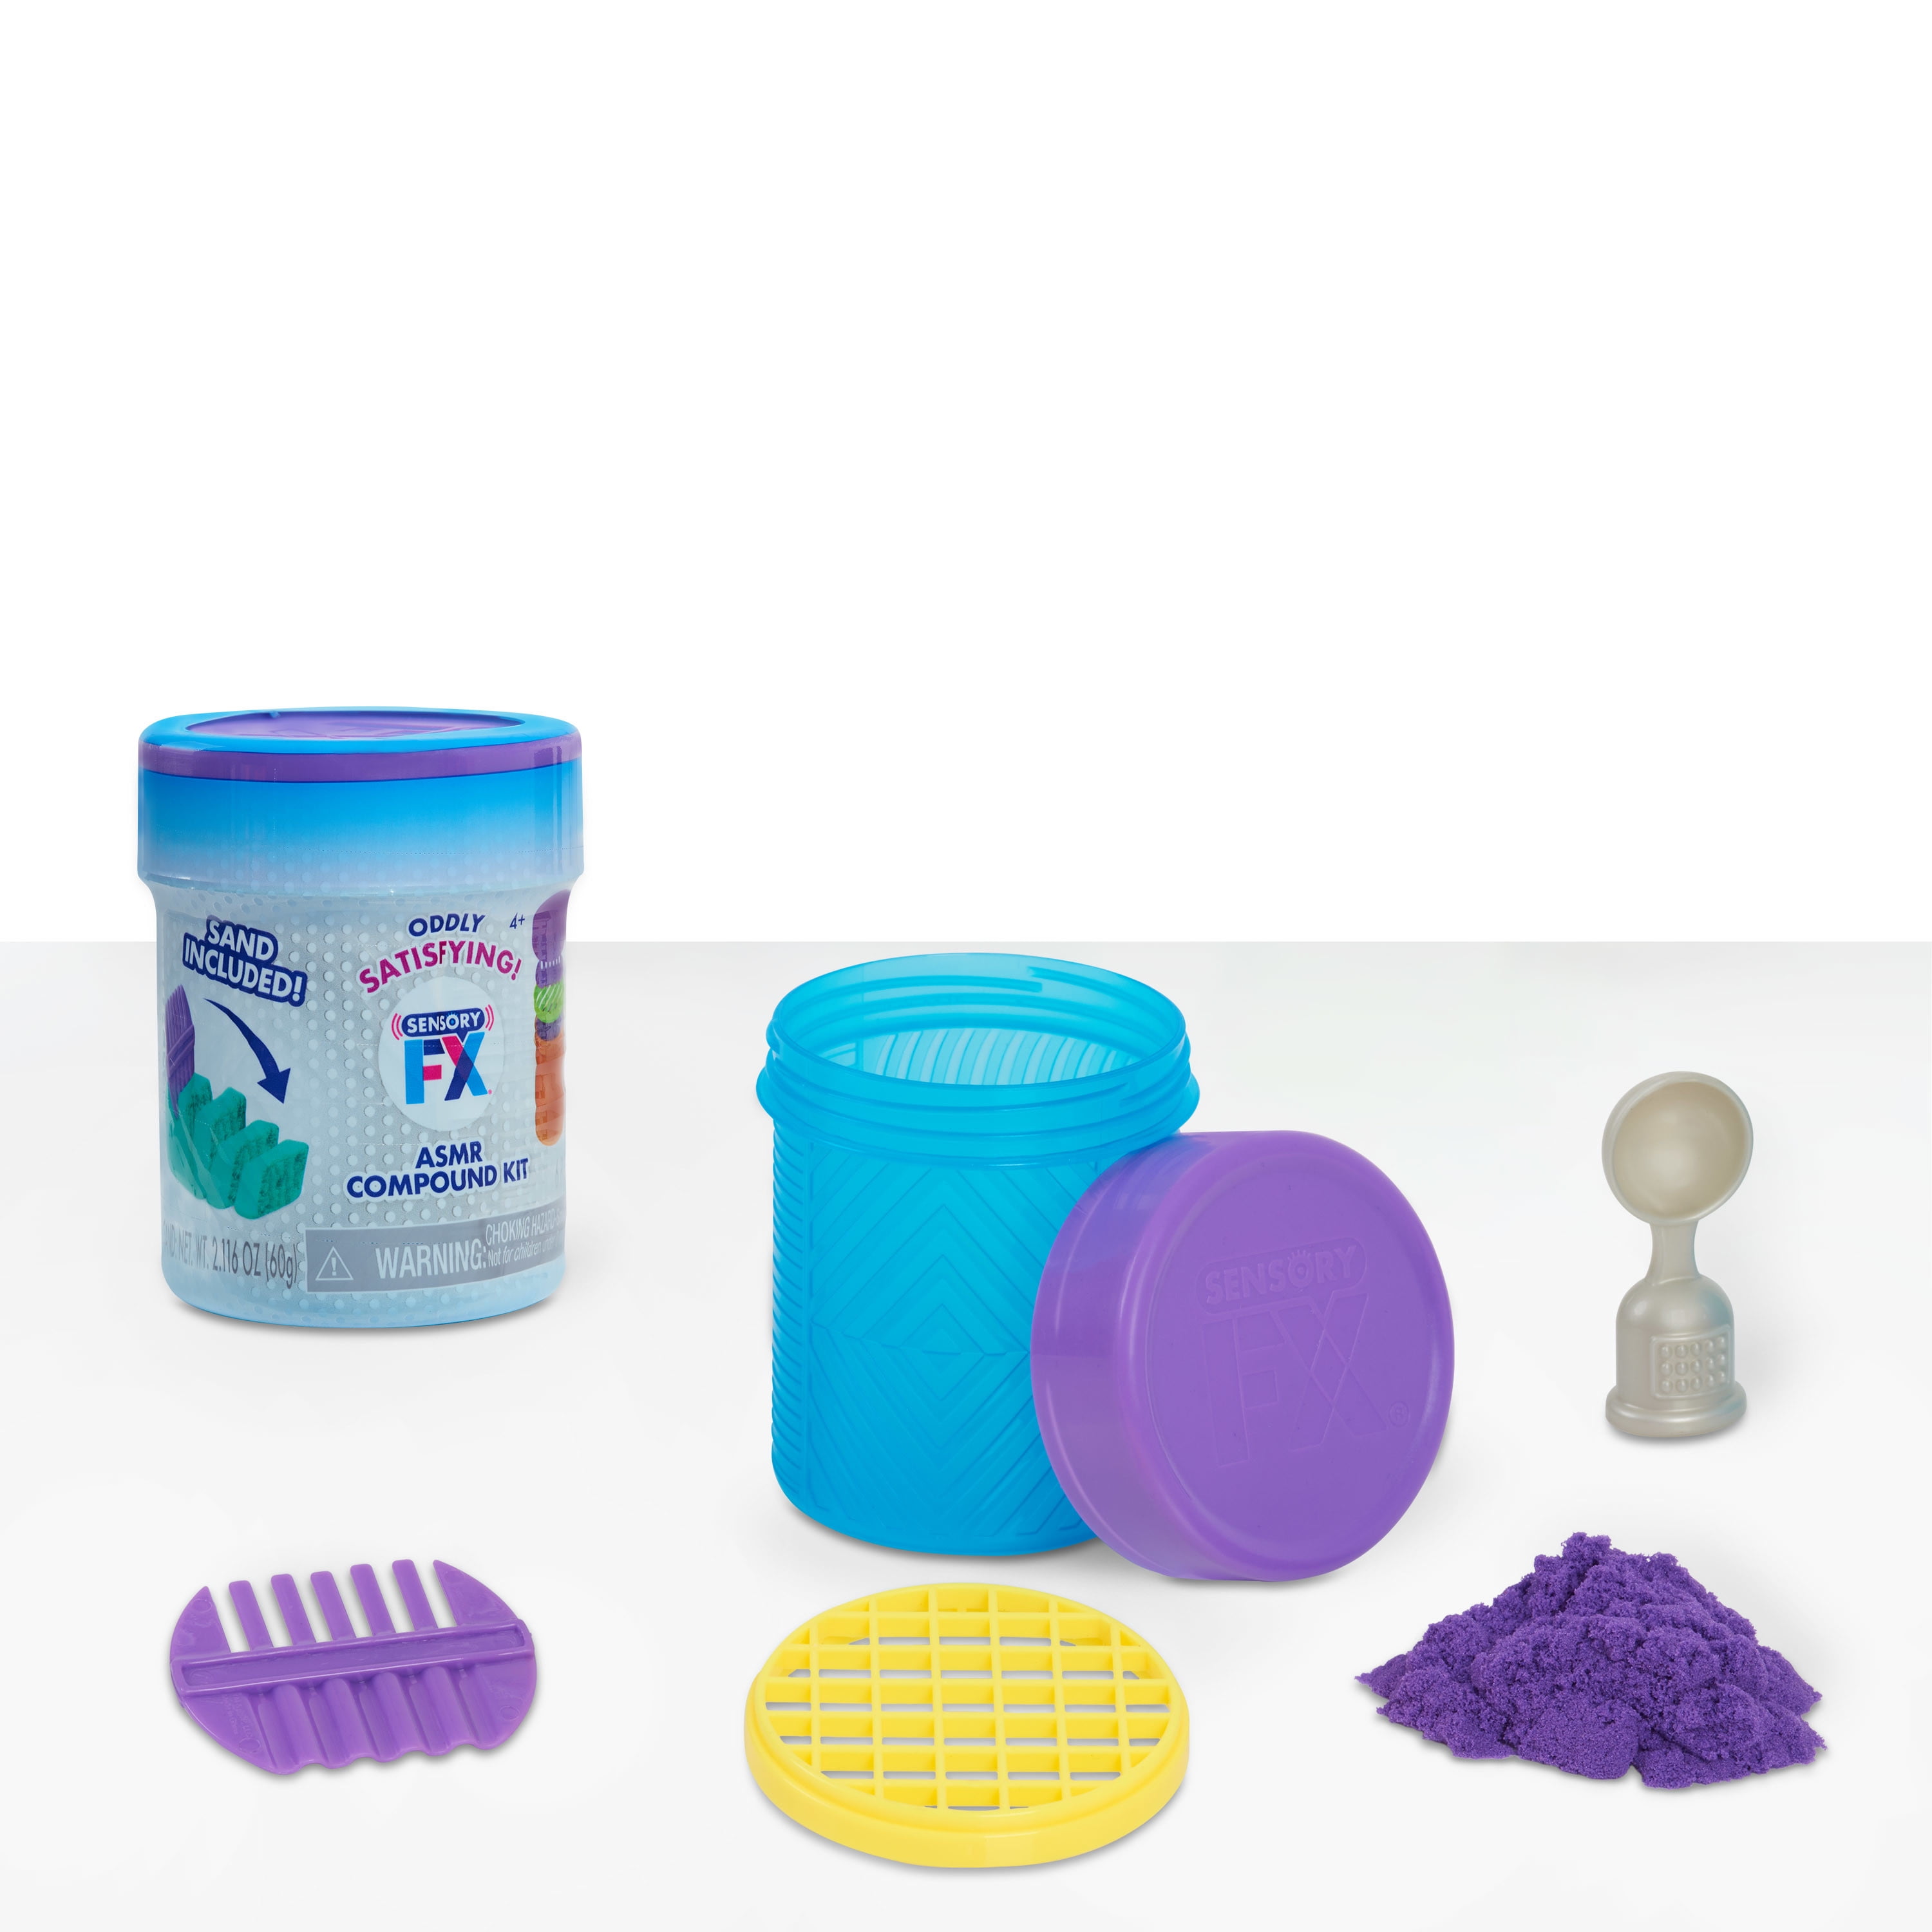 Sensory FX ASMR Compound Kit Assortment, Sold Separately and Styles Will Vary, Fidget and Stress Toys for Kids and Adults, Create Unique and Sound Effects - Walmart.com